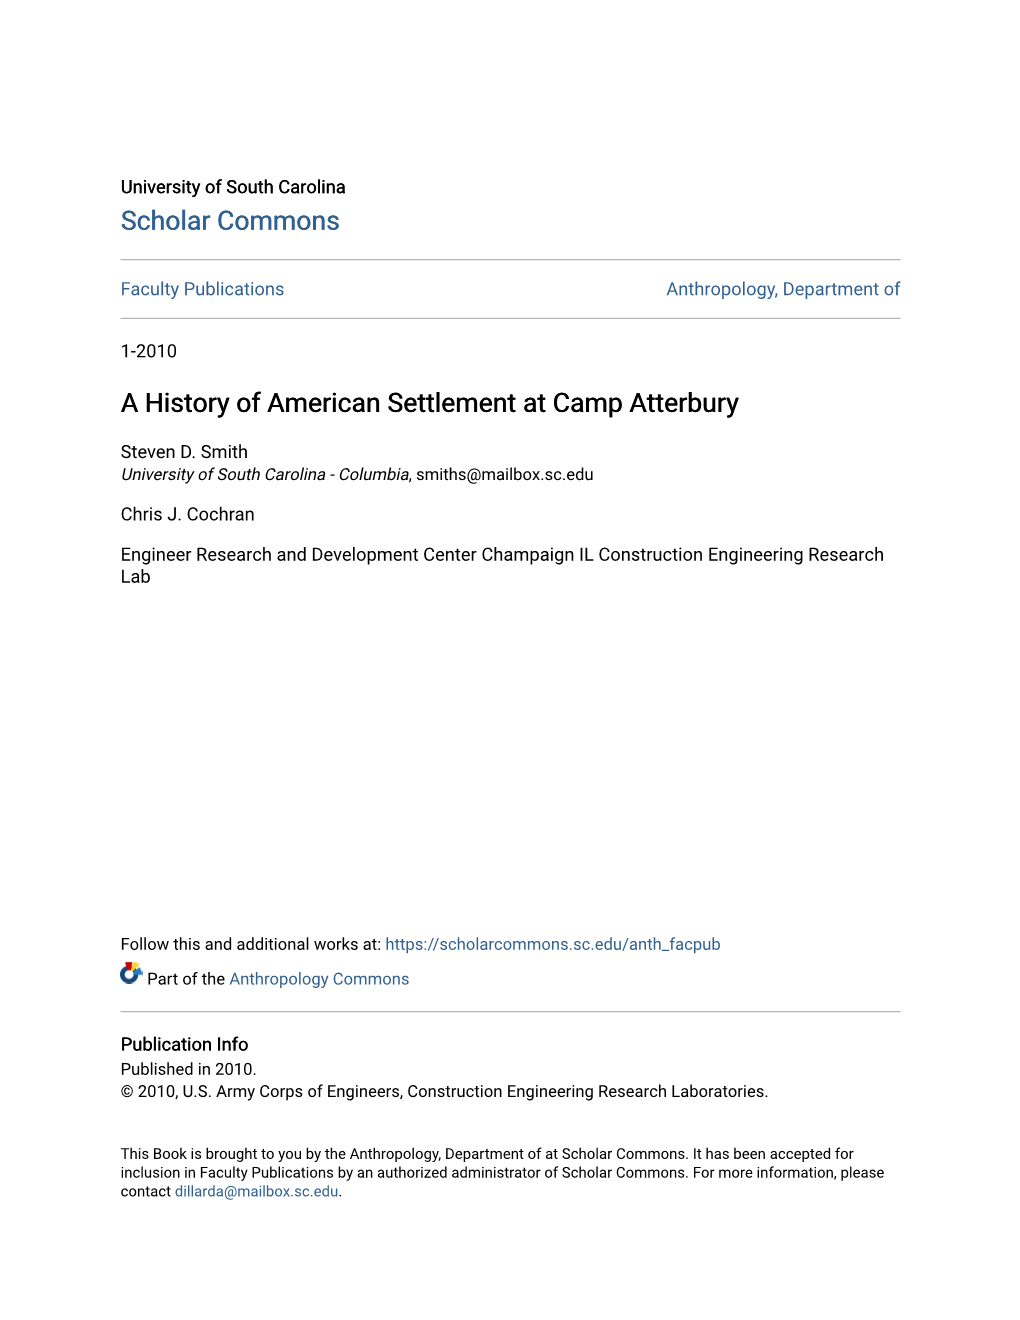 A History of American Settlement at Camp Atterbury